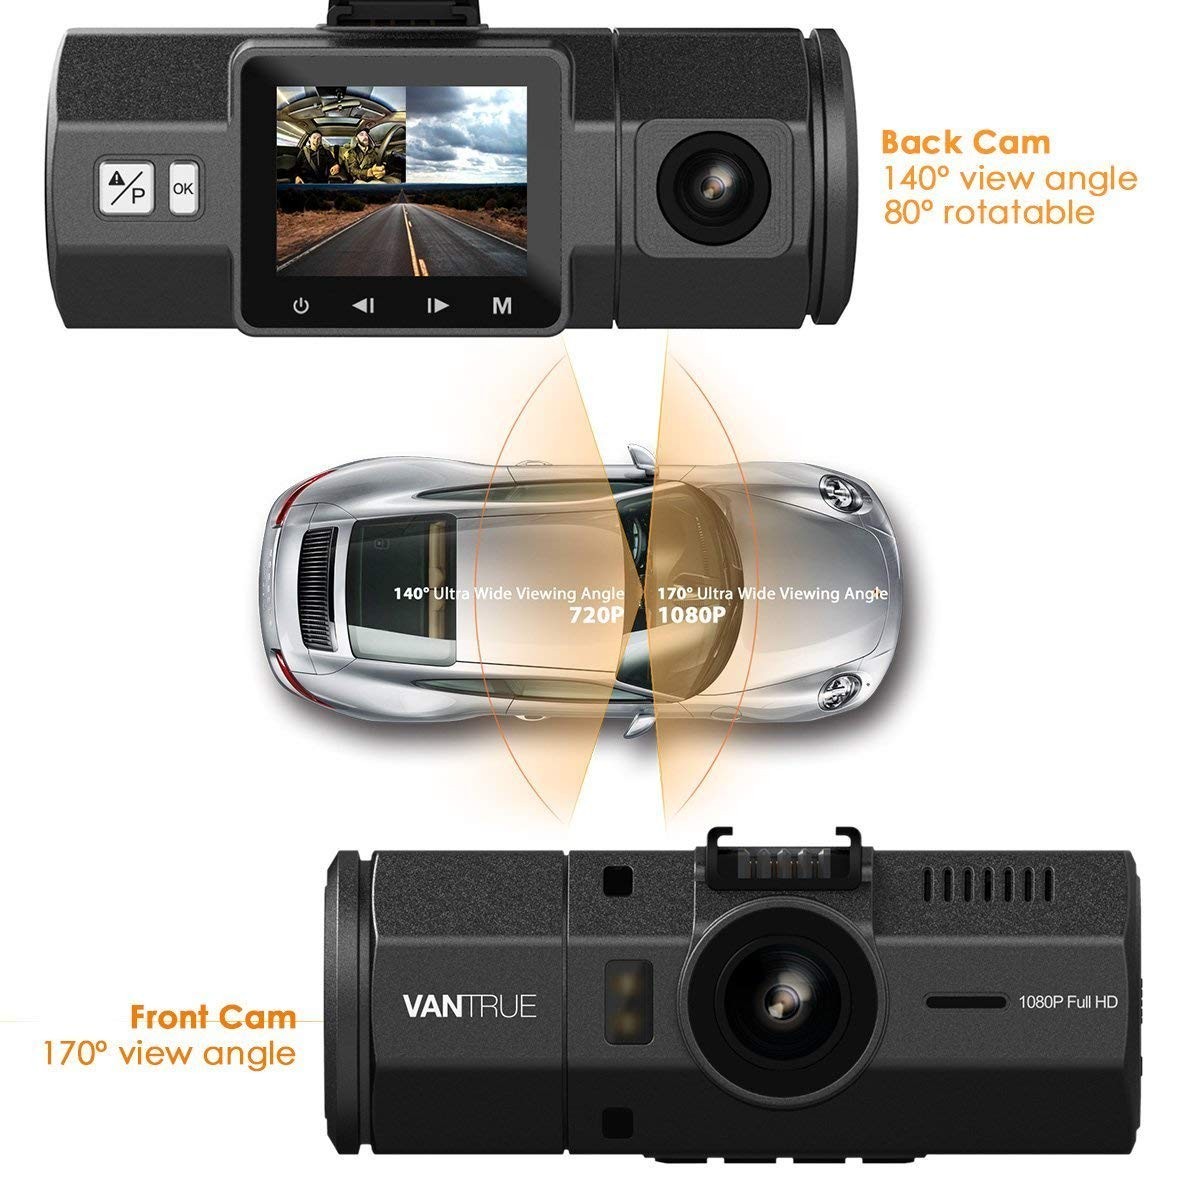 Vantrue N2 Dual Dash Cam-1080P FHD HDR Front and Back Wide Angle Dual Lens